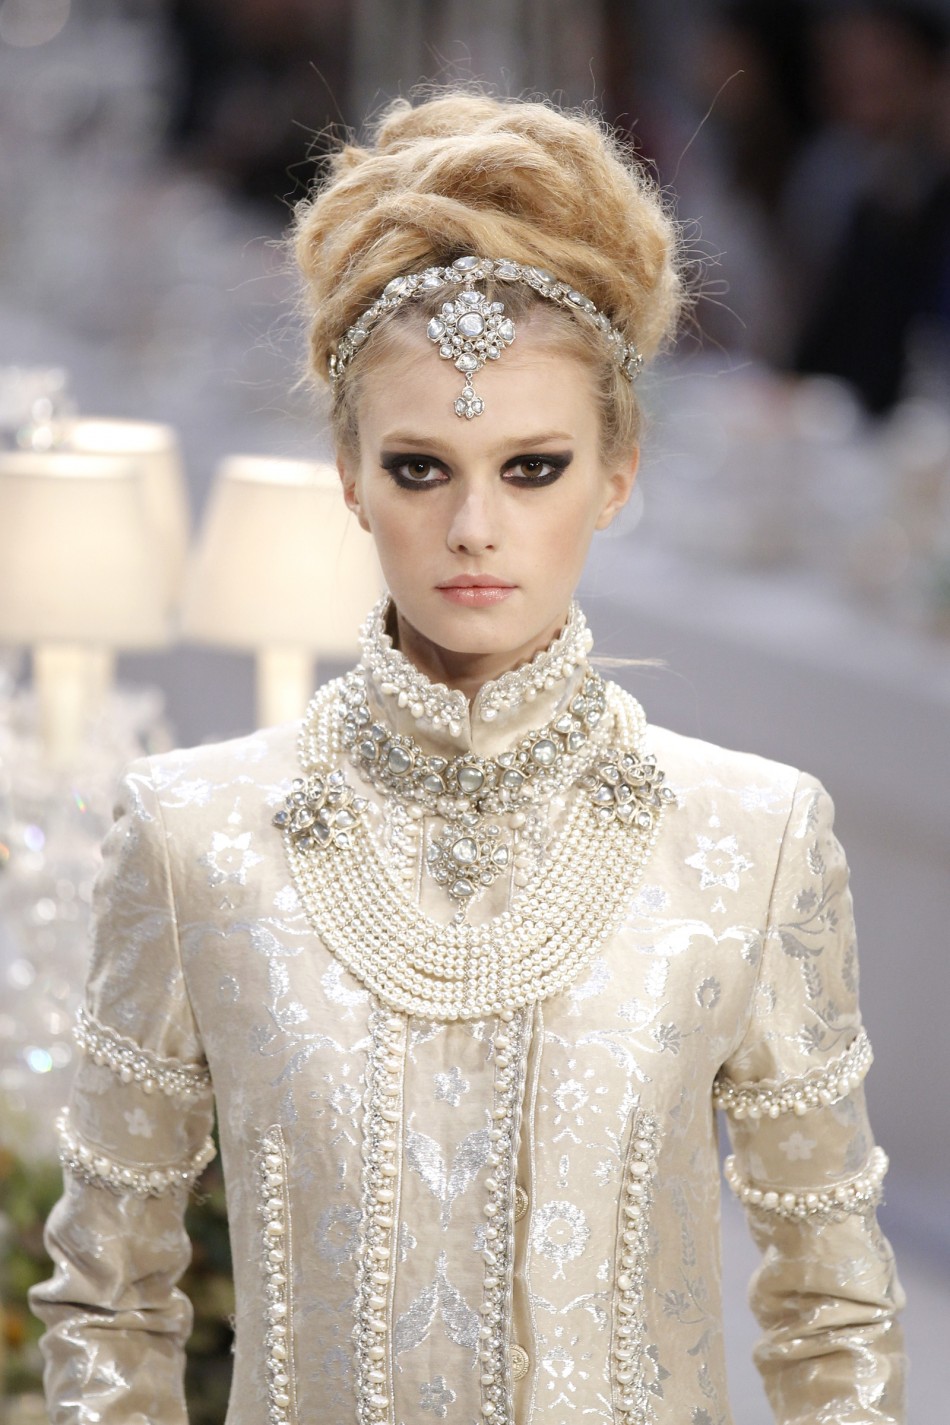 Karl Lagerfeld Hosts India-Inspired Couture Show for Chanel Fashion House